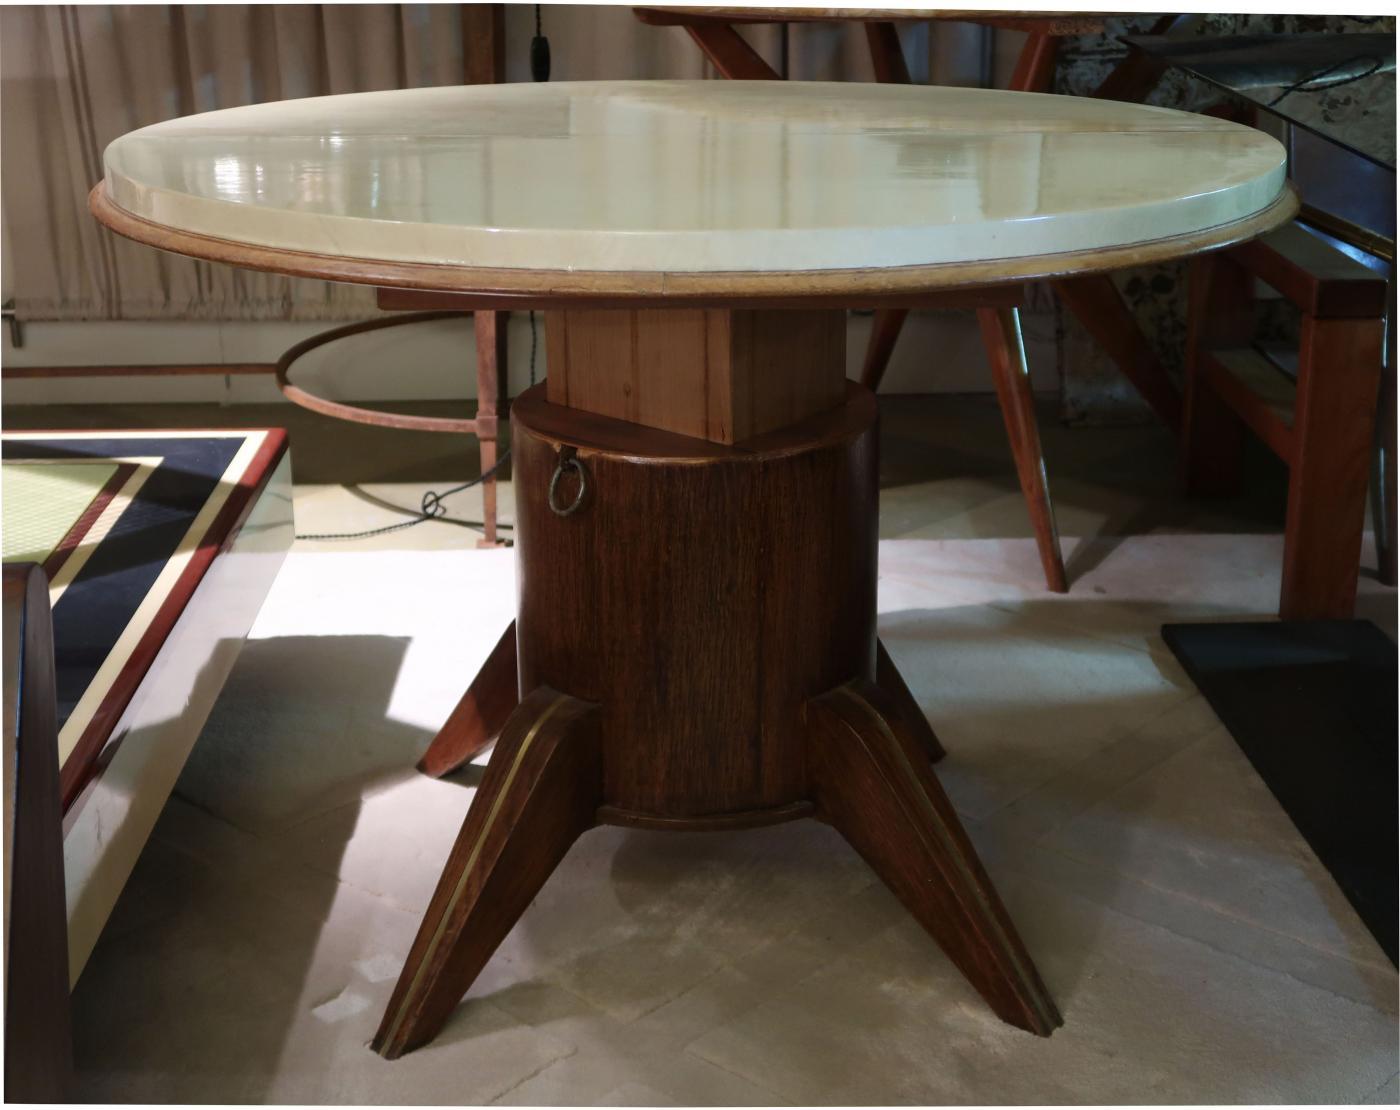 Lacquered Parchment, Wood & Brass Extensible Midcentury Italian Table Attributed to Adnet